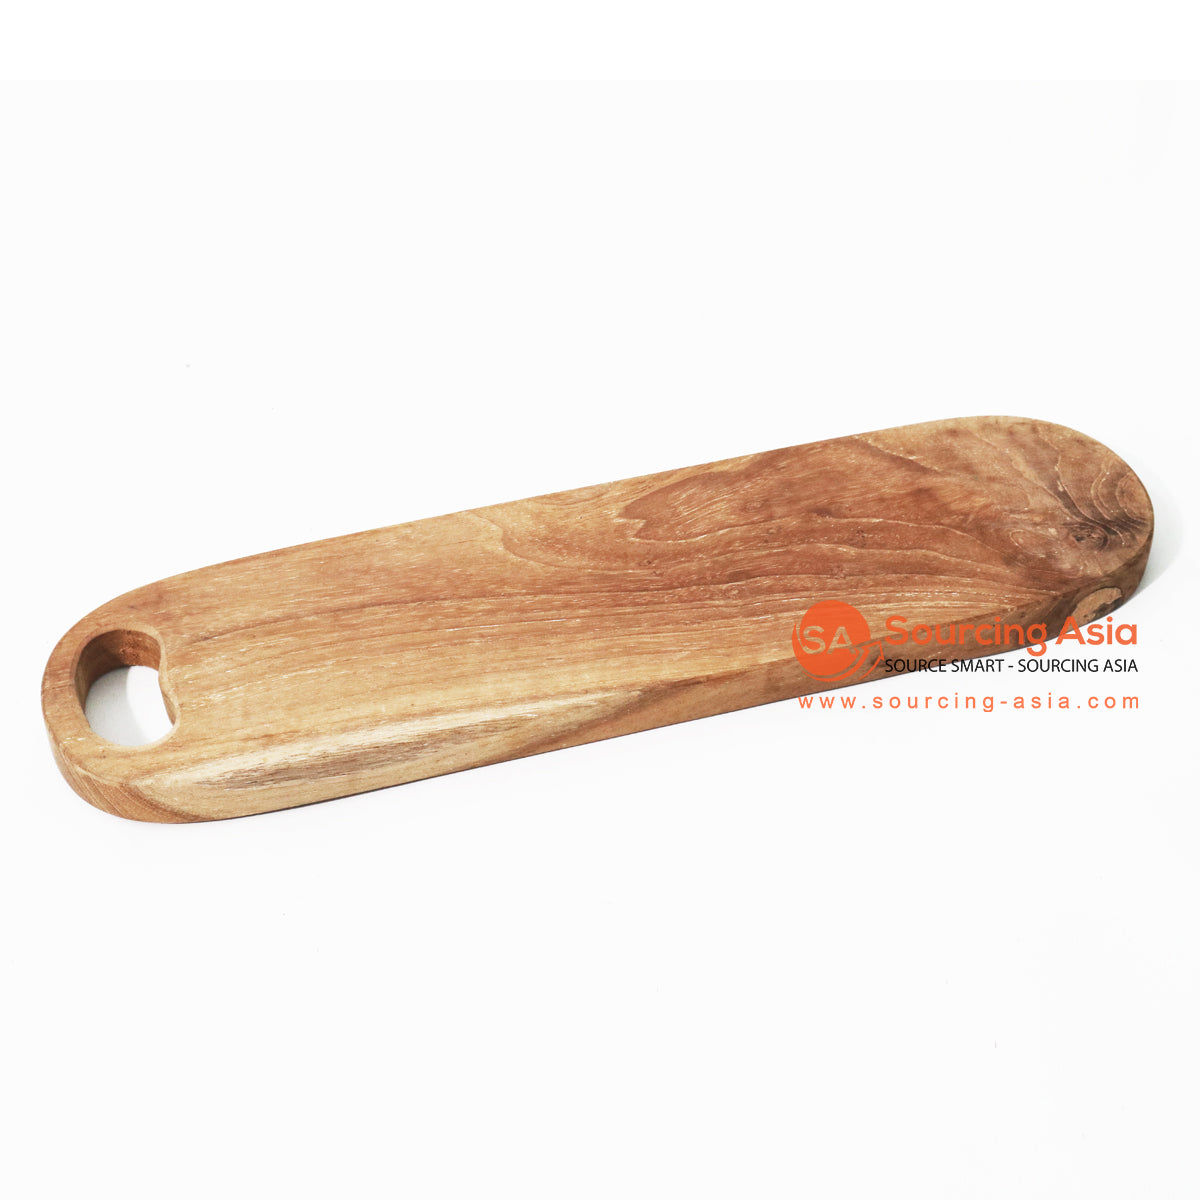 MSB025 NATURAL TEAK WOOD OVAL CHEESE BOARD WITH HANDLE